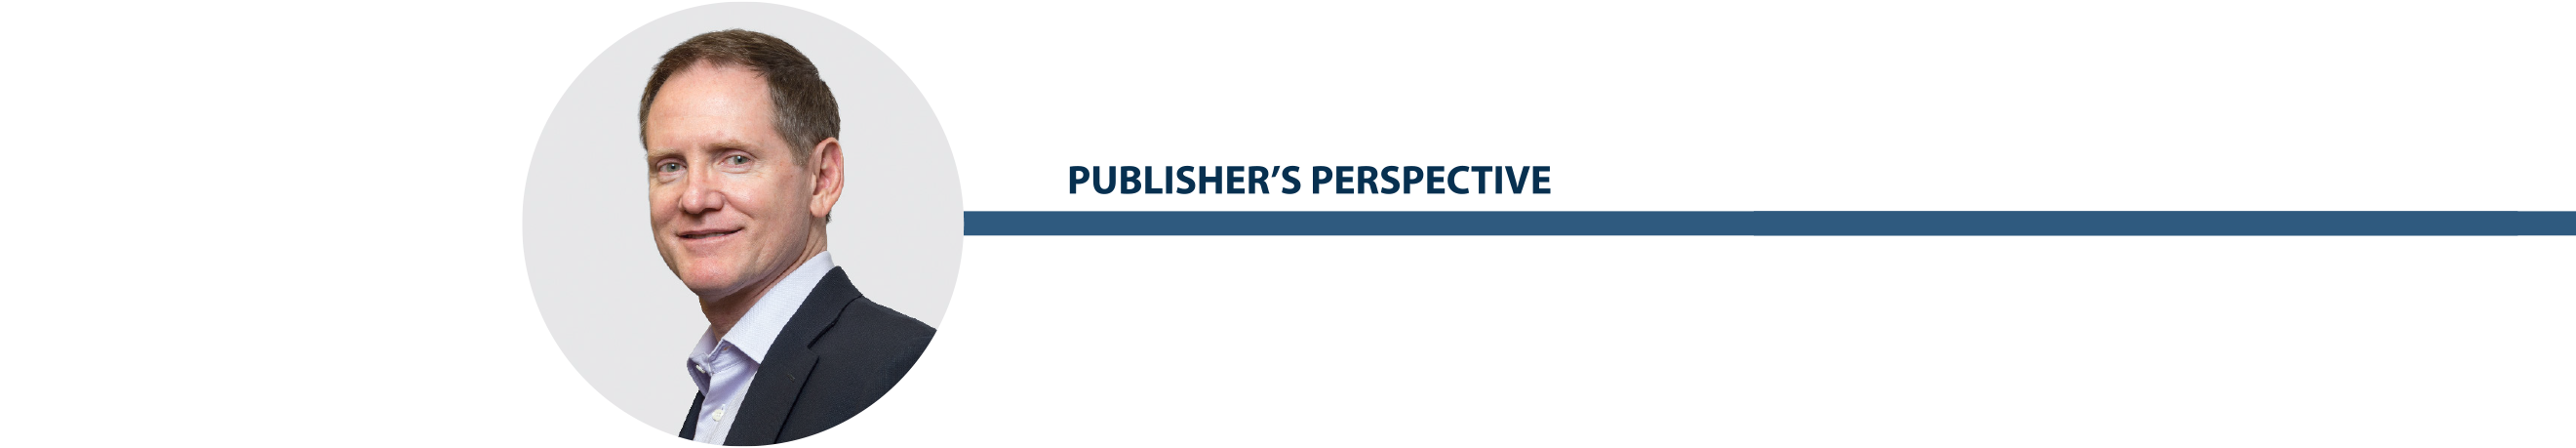 Publisher’s Perspective